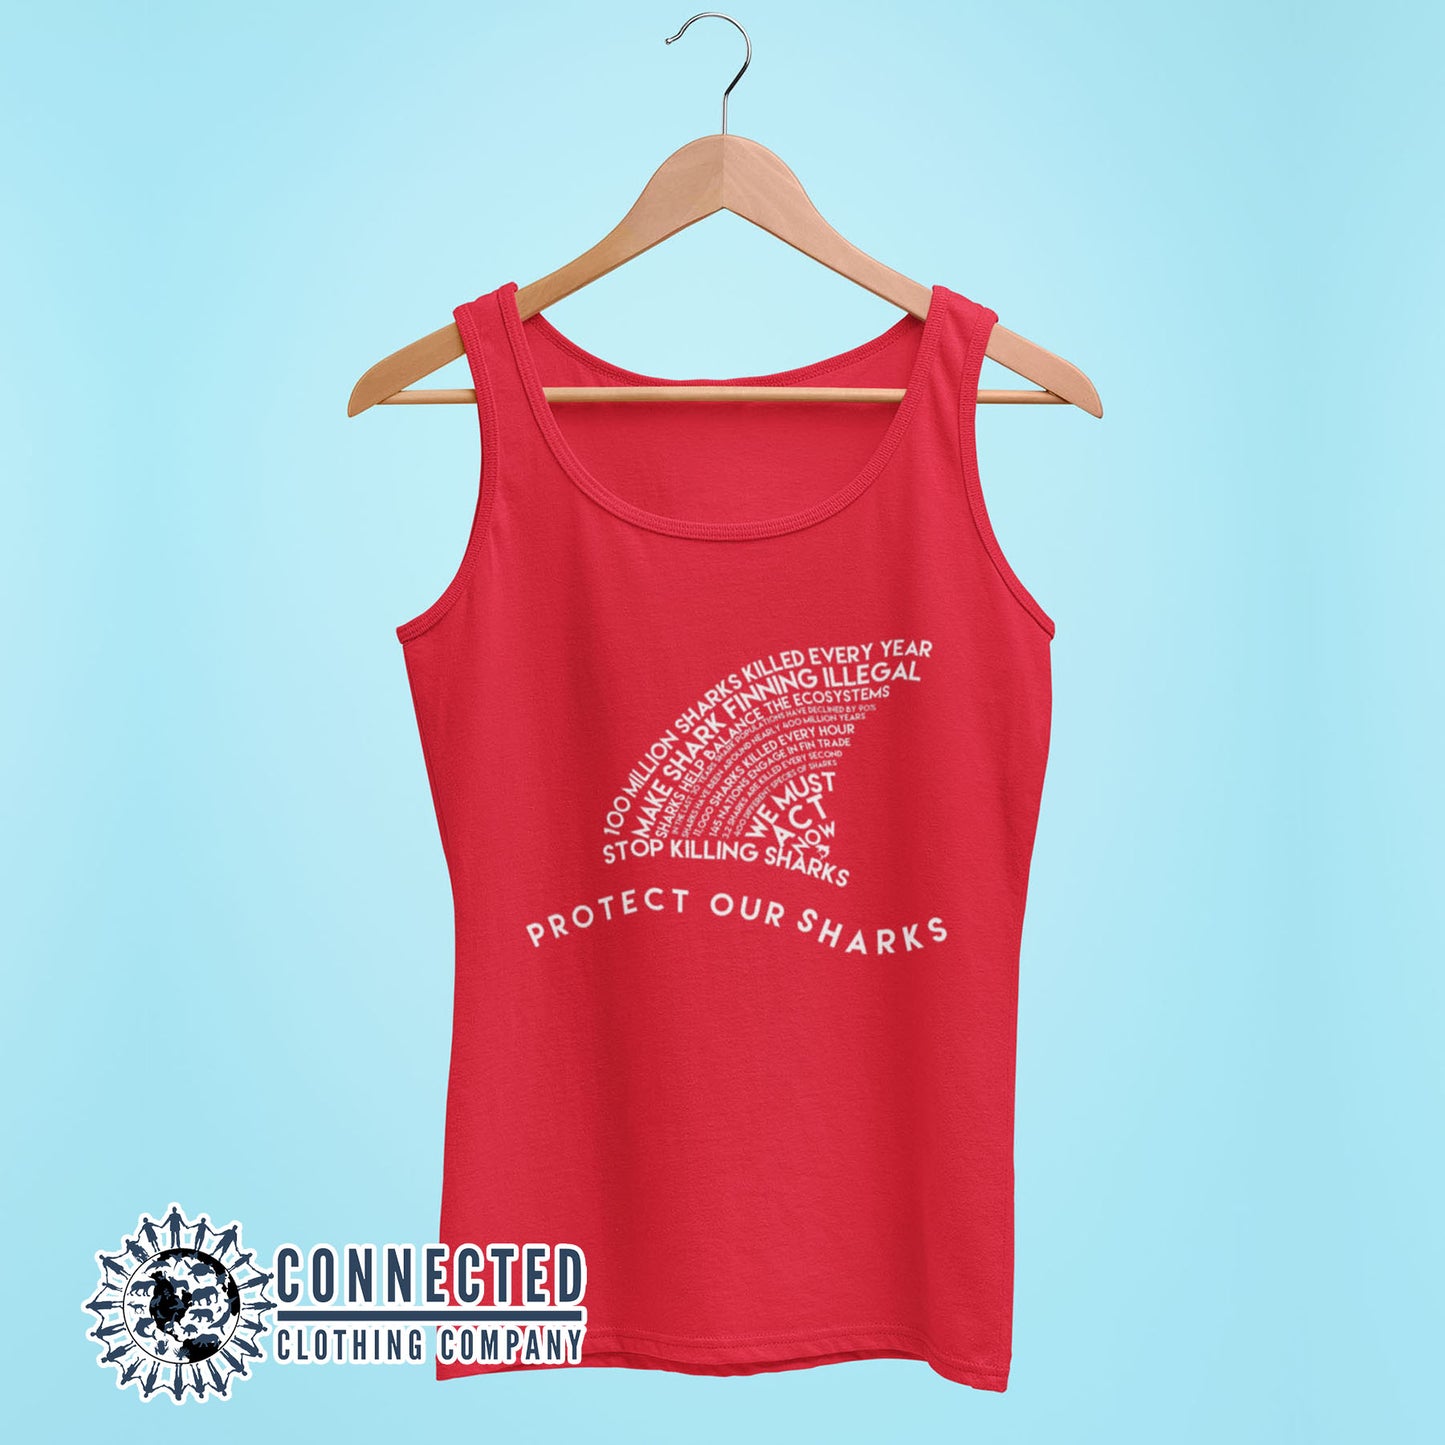 Red Protect Our Sharks Women's Relaxed Tank Top - sharonkornman - Ethically and Sustainably Made - 10% of profits donated to Oceana shark conservation